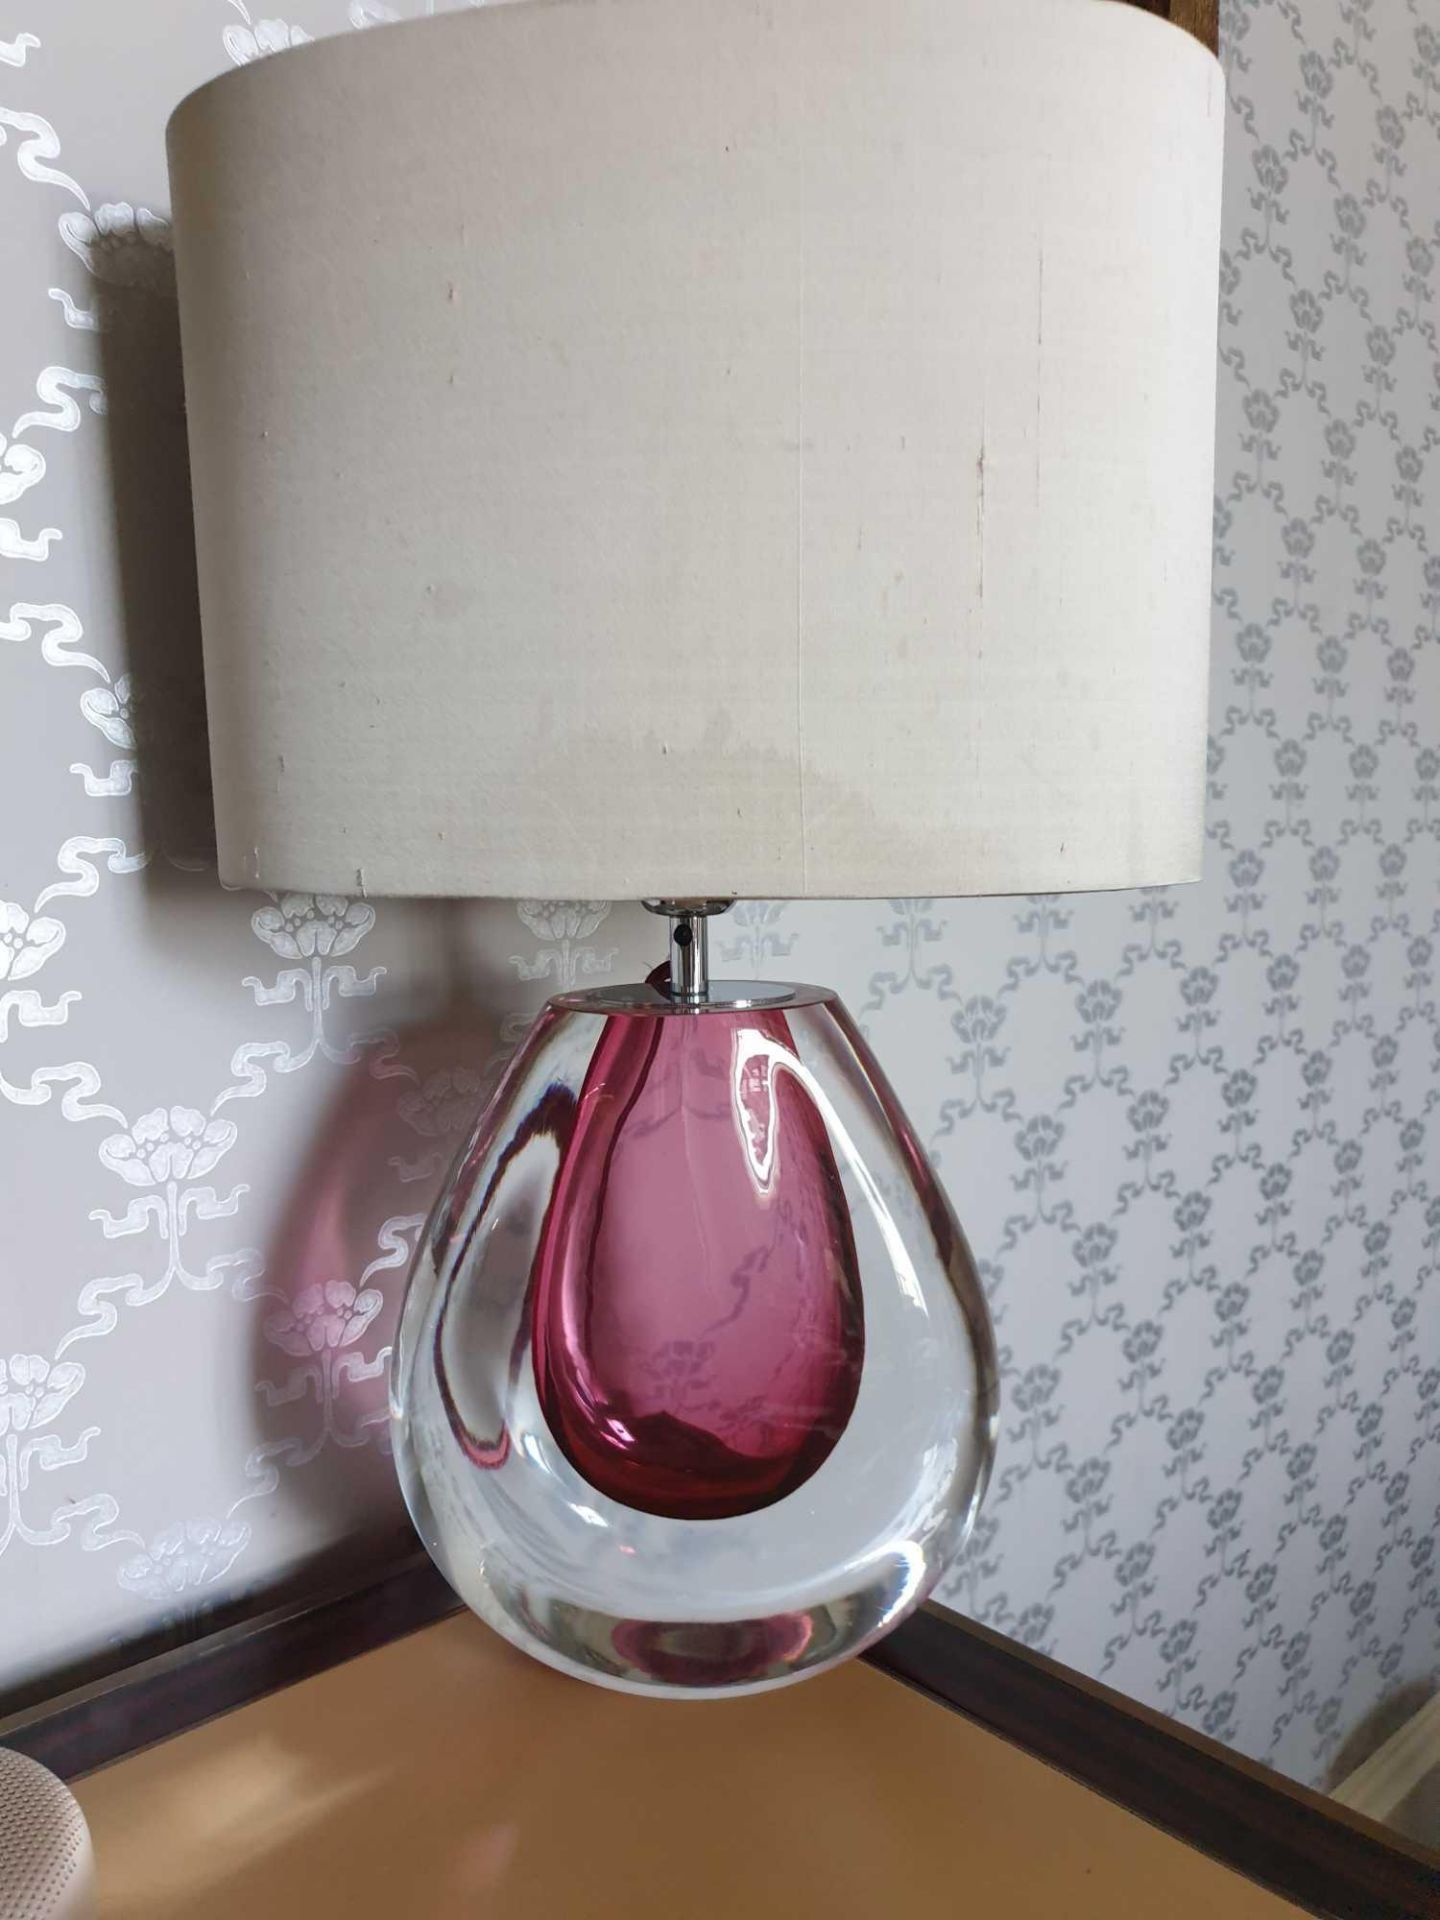 Heathfield And Co Mia Table Lamp Mouth-Blown Glass Features An Intense Drop Of Colour And A Satin